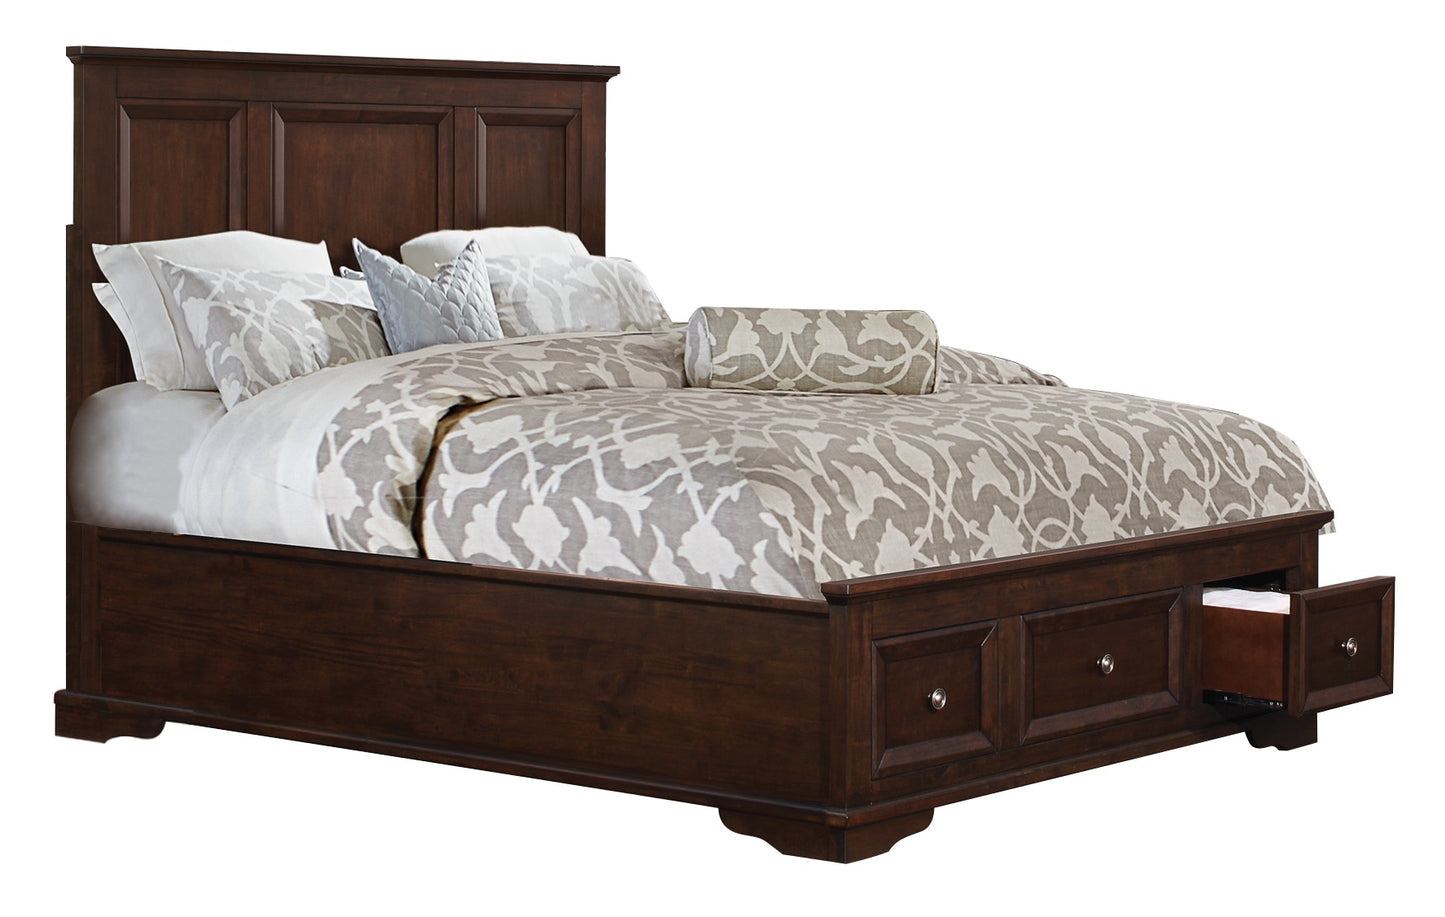 Elista Rustic Country Full Platform Bed with Footboard Storage in Espresso